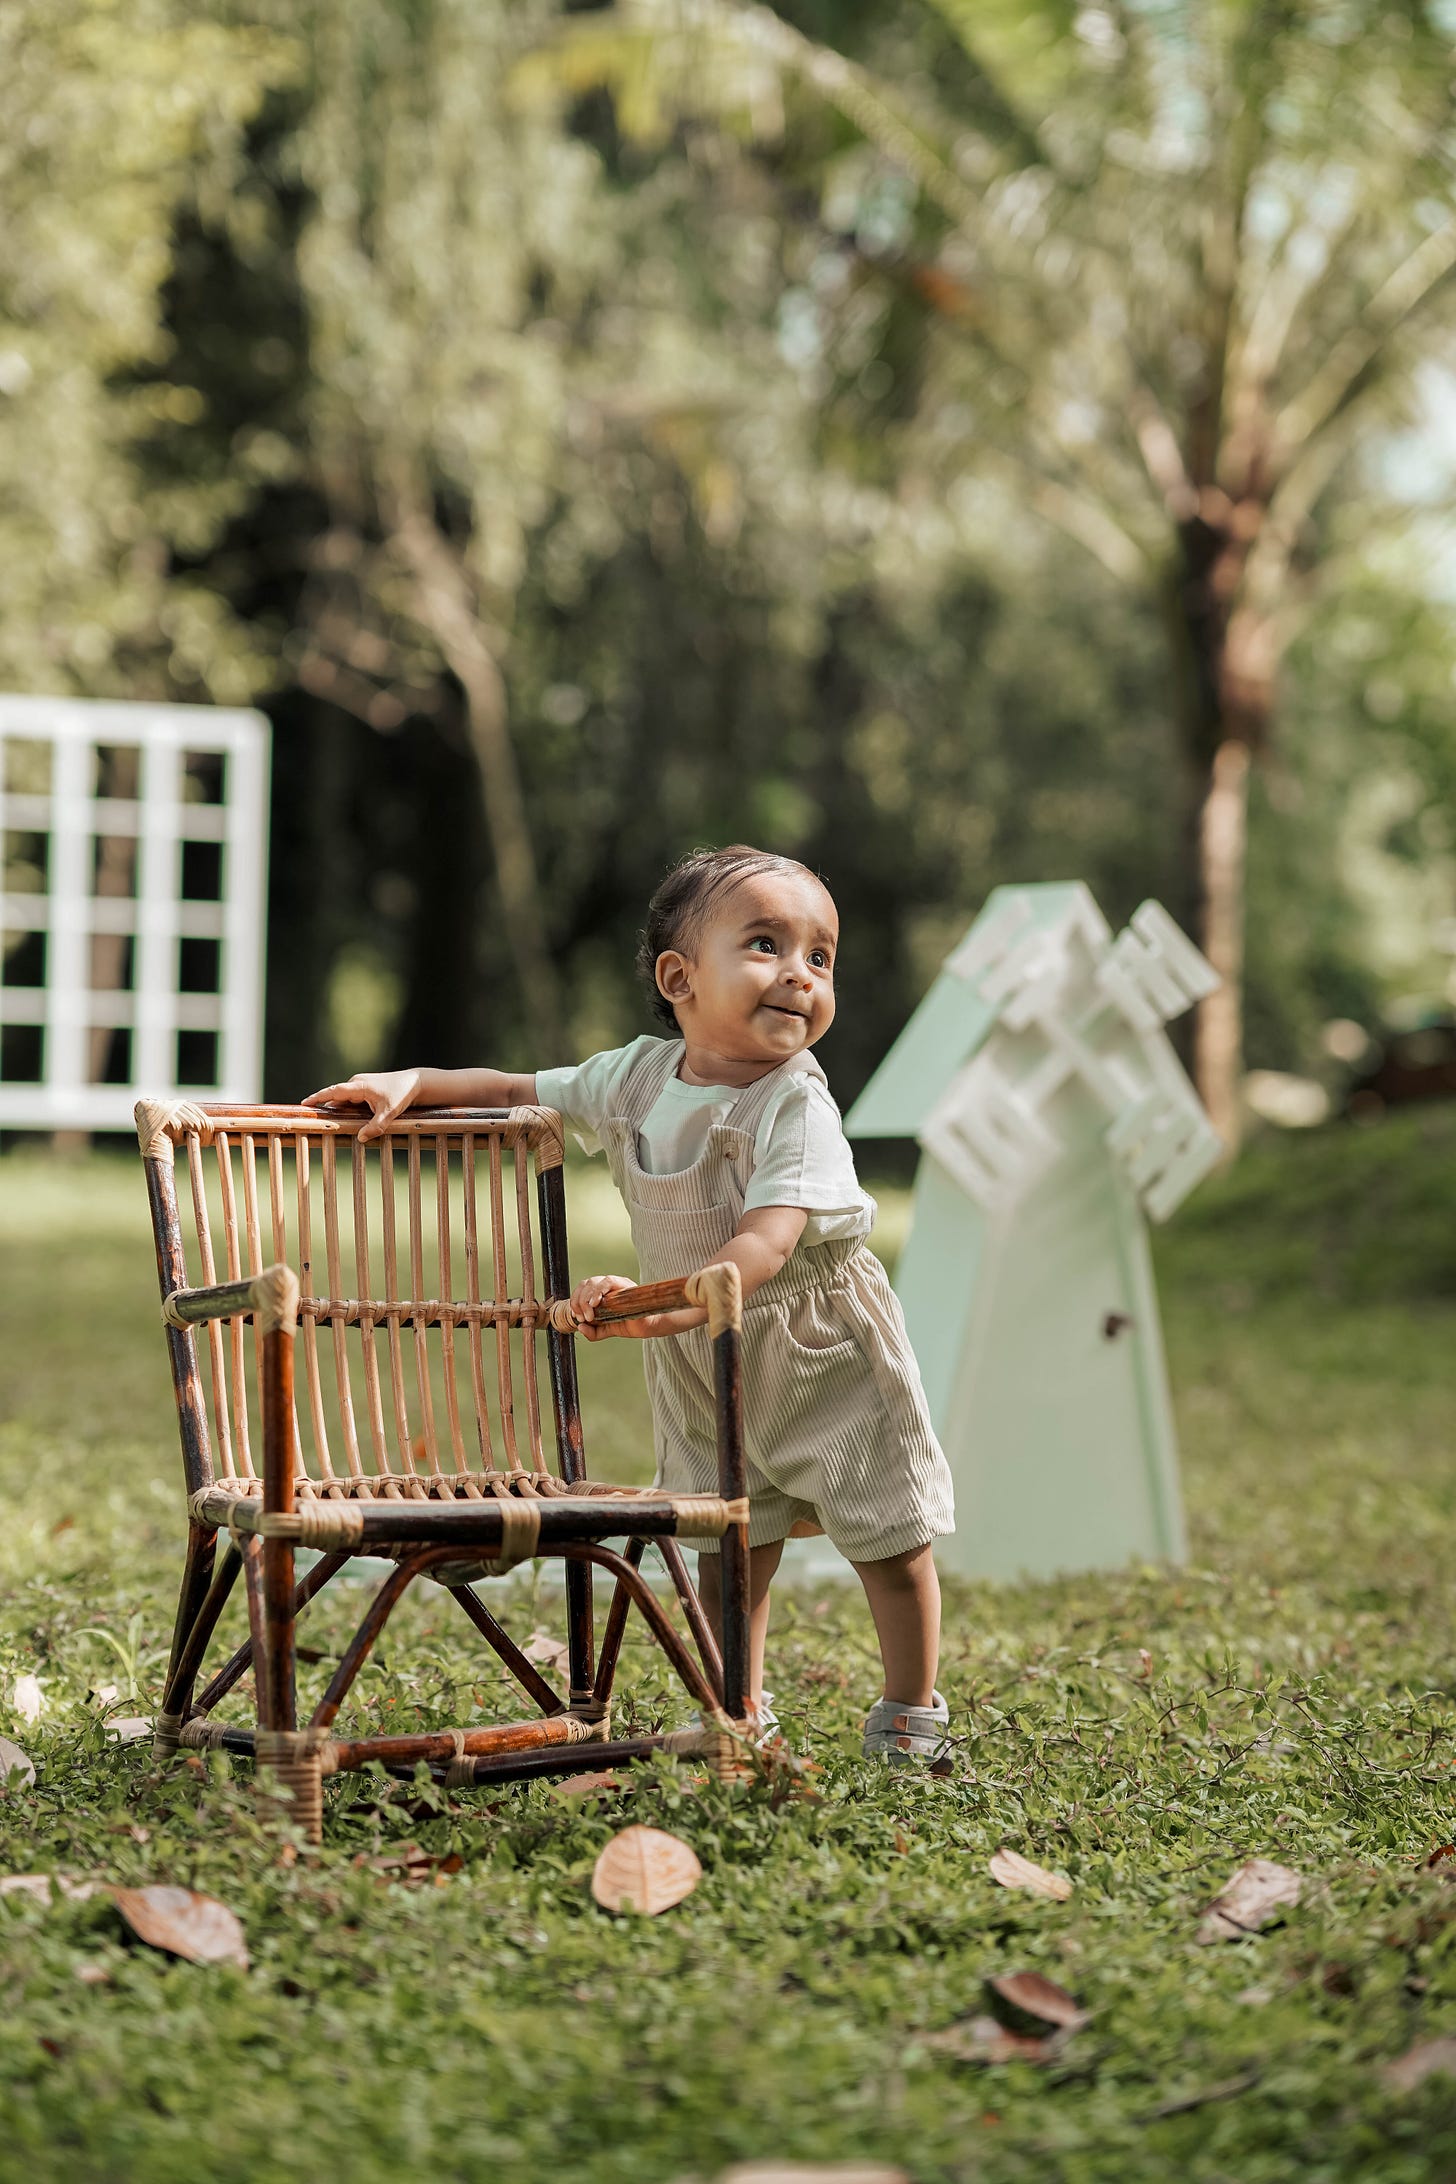 a toddler setting up a chair in a lawn and trying to stand up on it